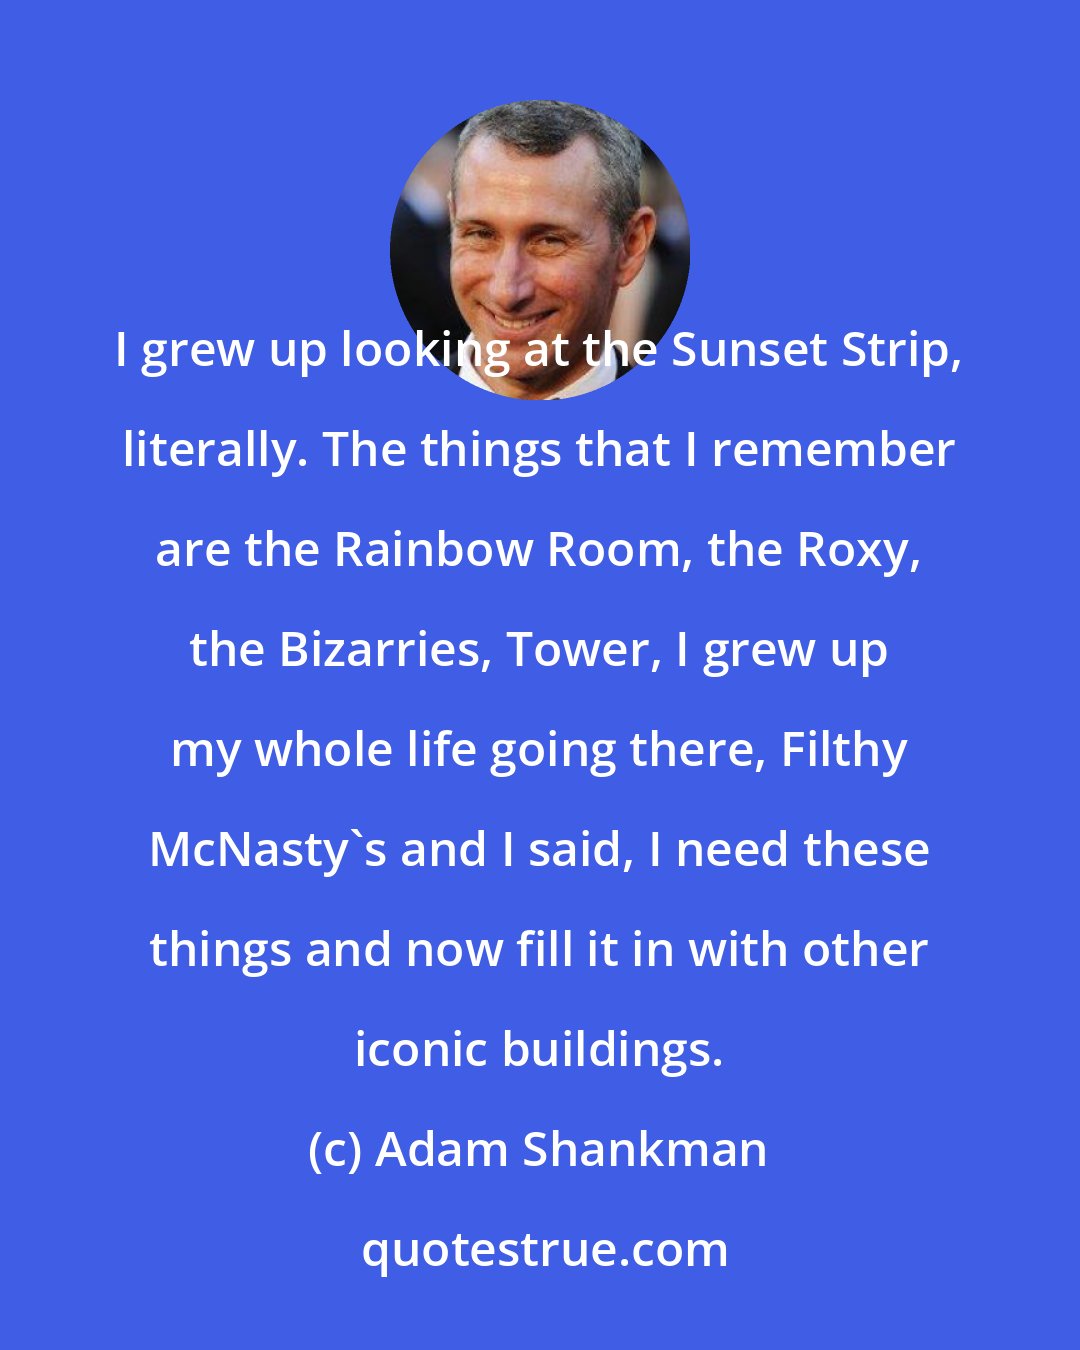 Adam Shankman: I grew up looking at the Sunset Strip, literally. The things that I remember are the Rainbow Room, the Roxy, the Bizarries, Tower, I grew up my whole life going there, Filthy McNasty's and I said, I need these things and now fill it in with other iconic buildings.